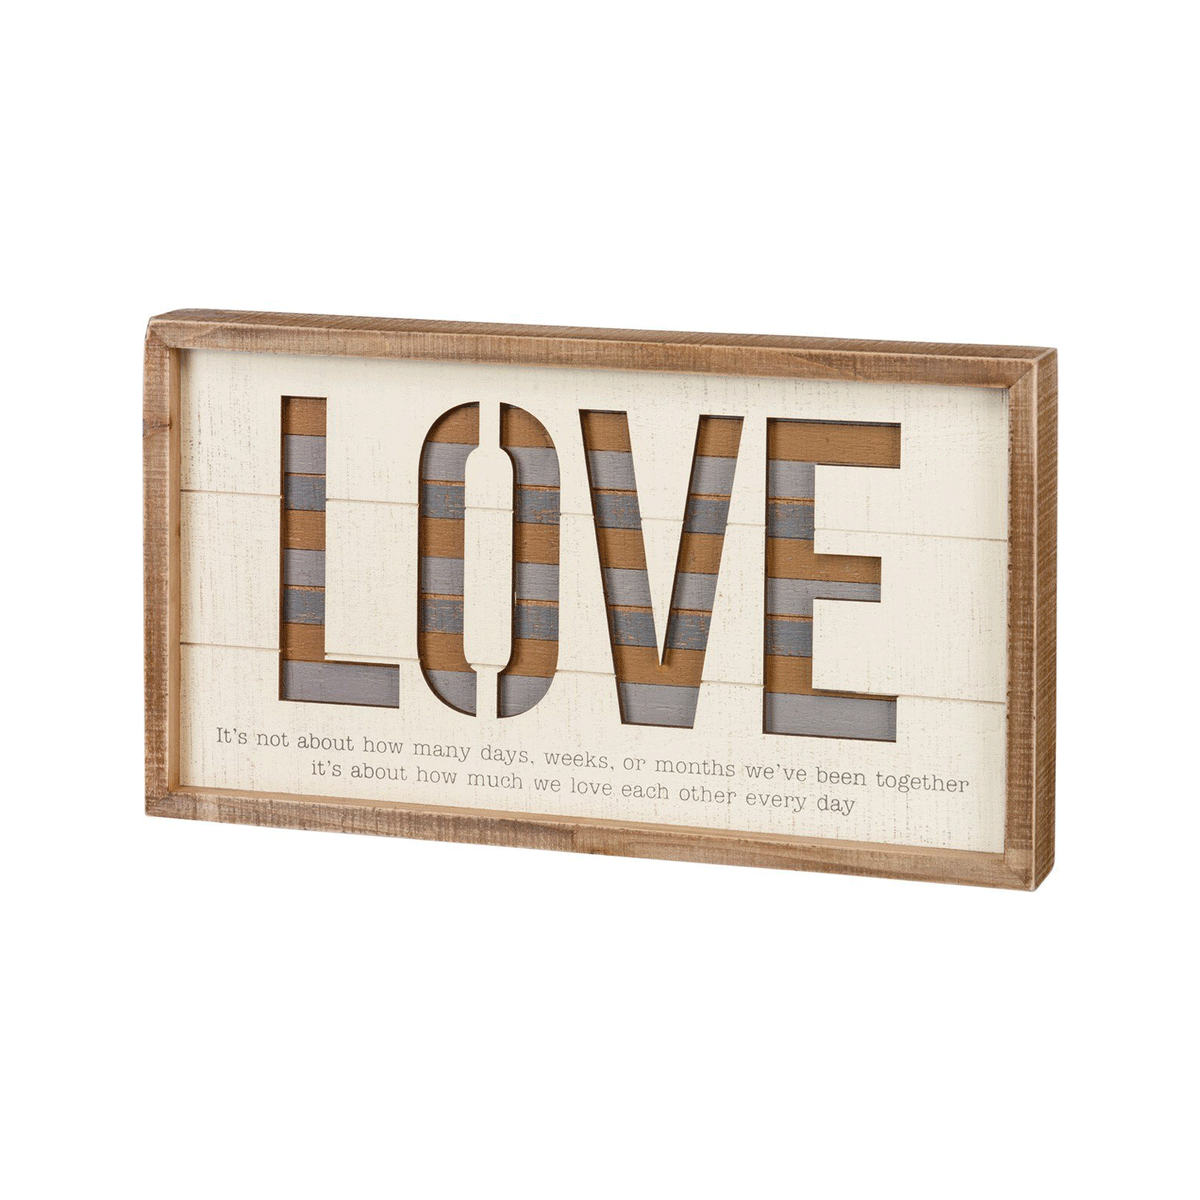 Love Each Other Every Day Box Sign - Signs & More